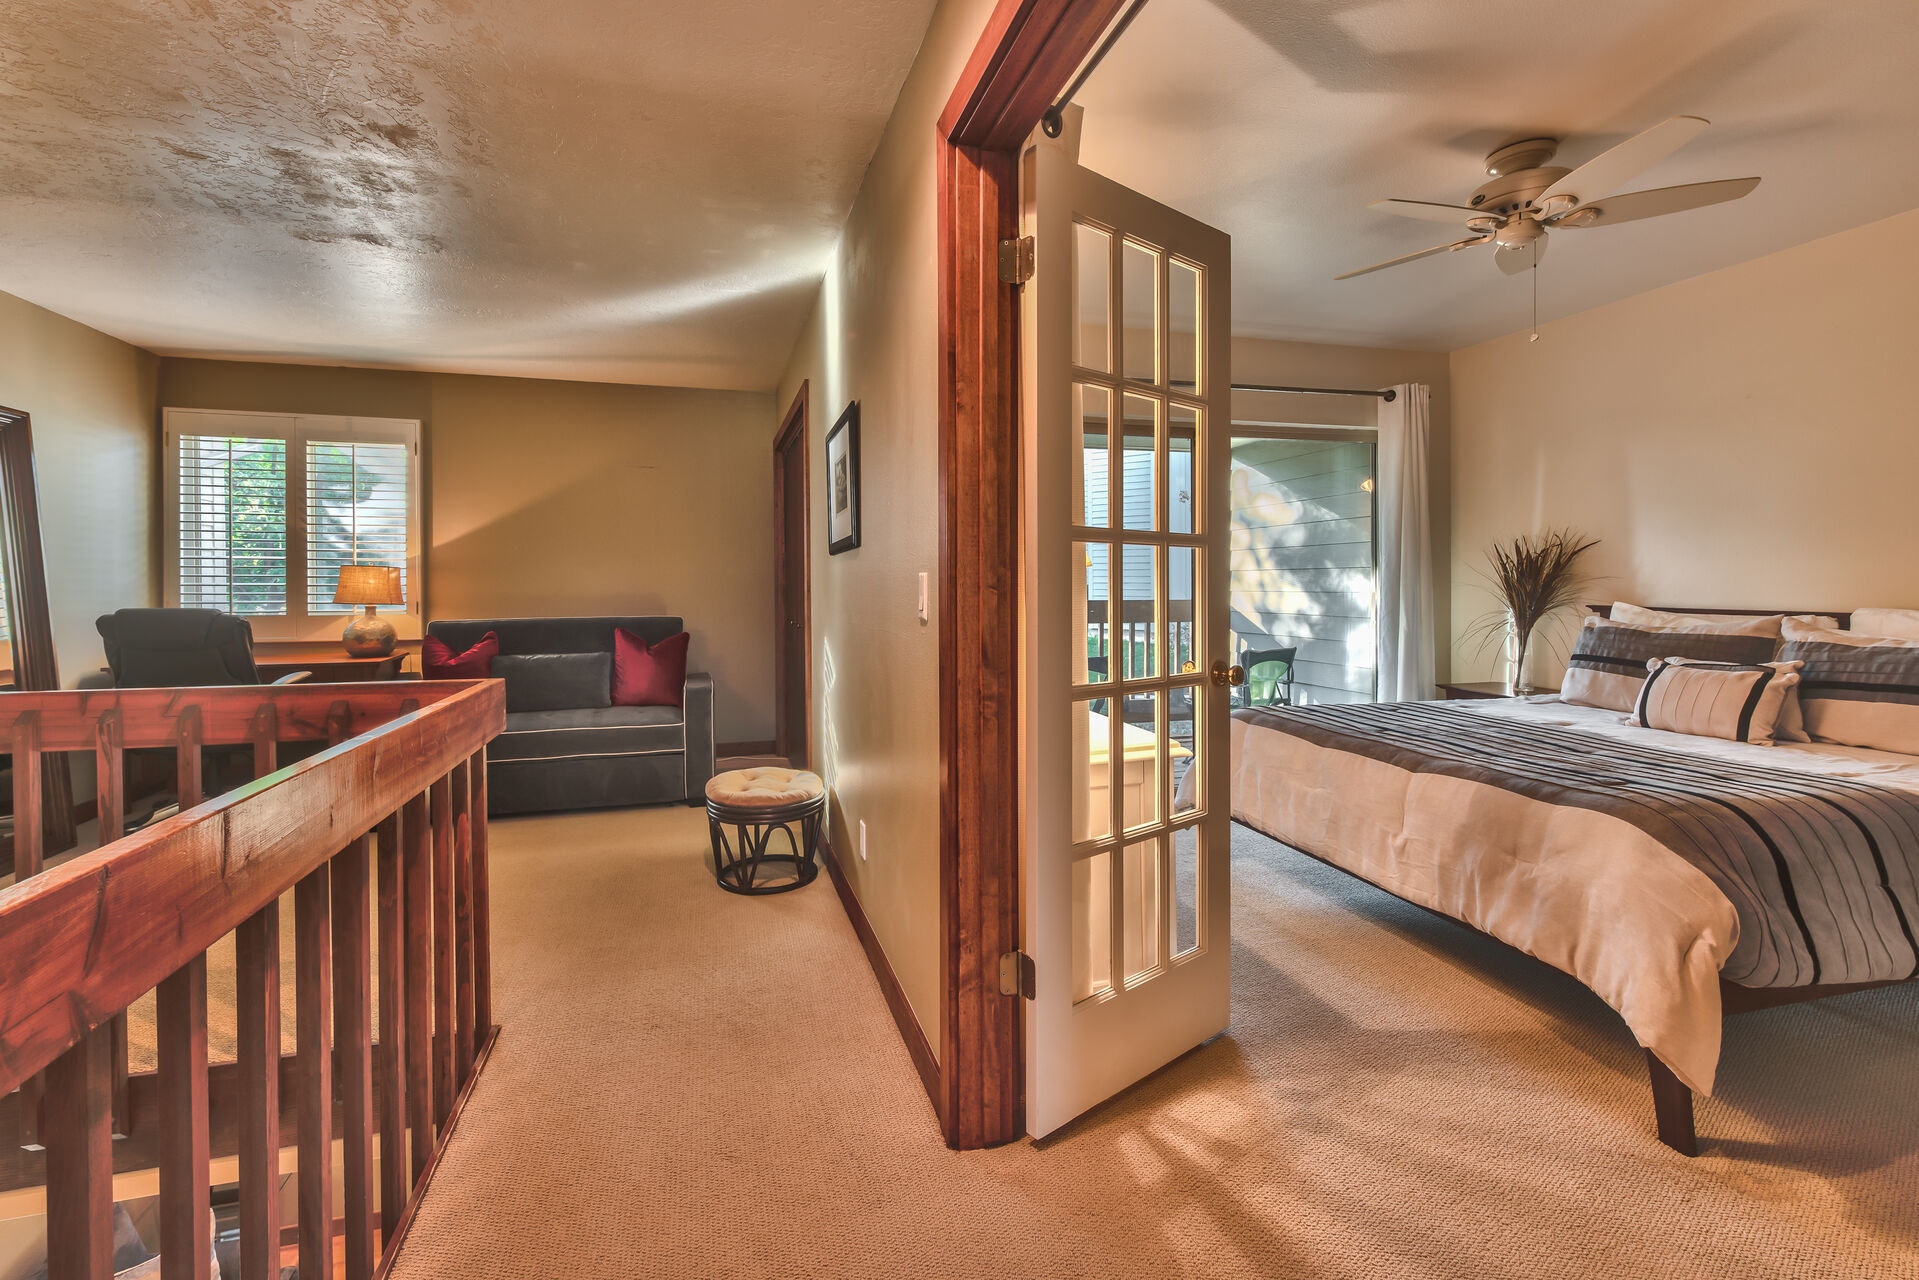 Open up the French Doors to the Master Bedroom